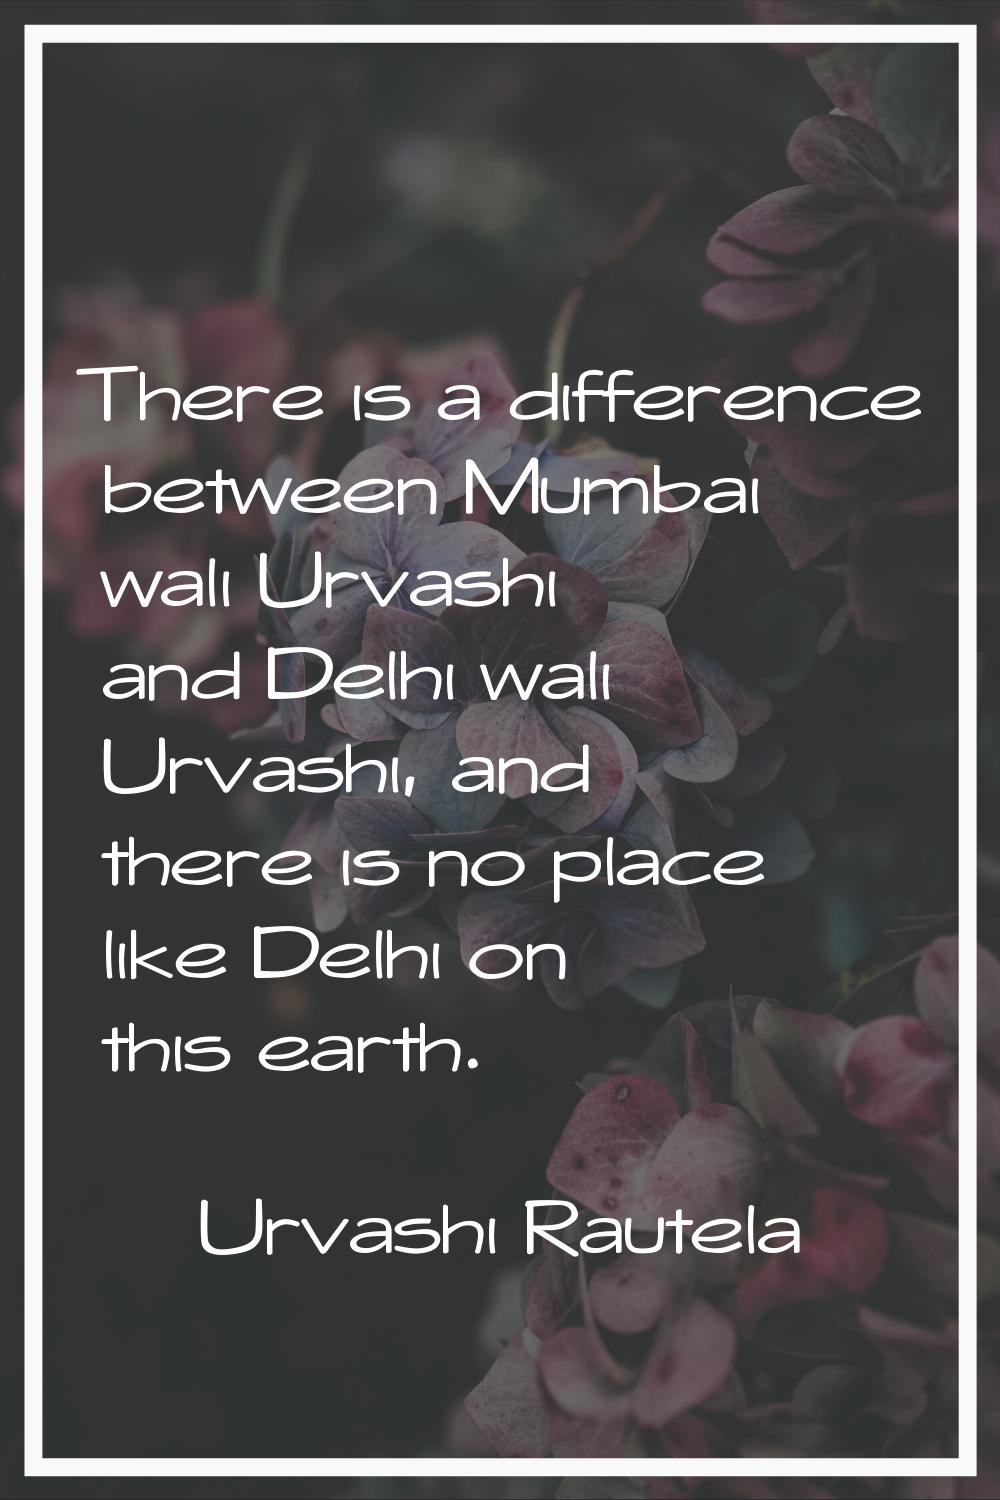 There is a difference between Mumbai wali Urvashi and Delhi wali Urvashi, and there is no place lik